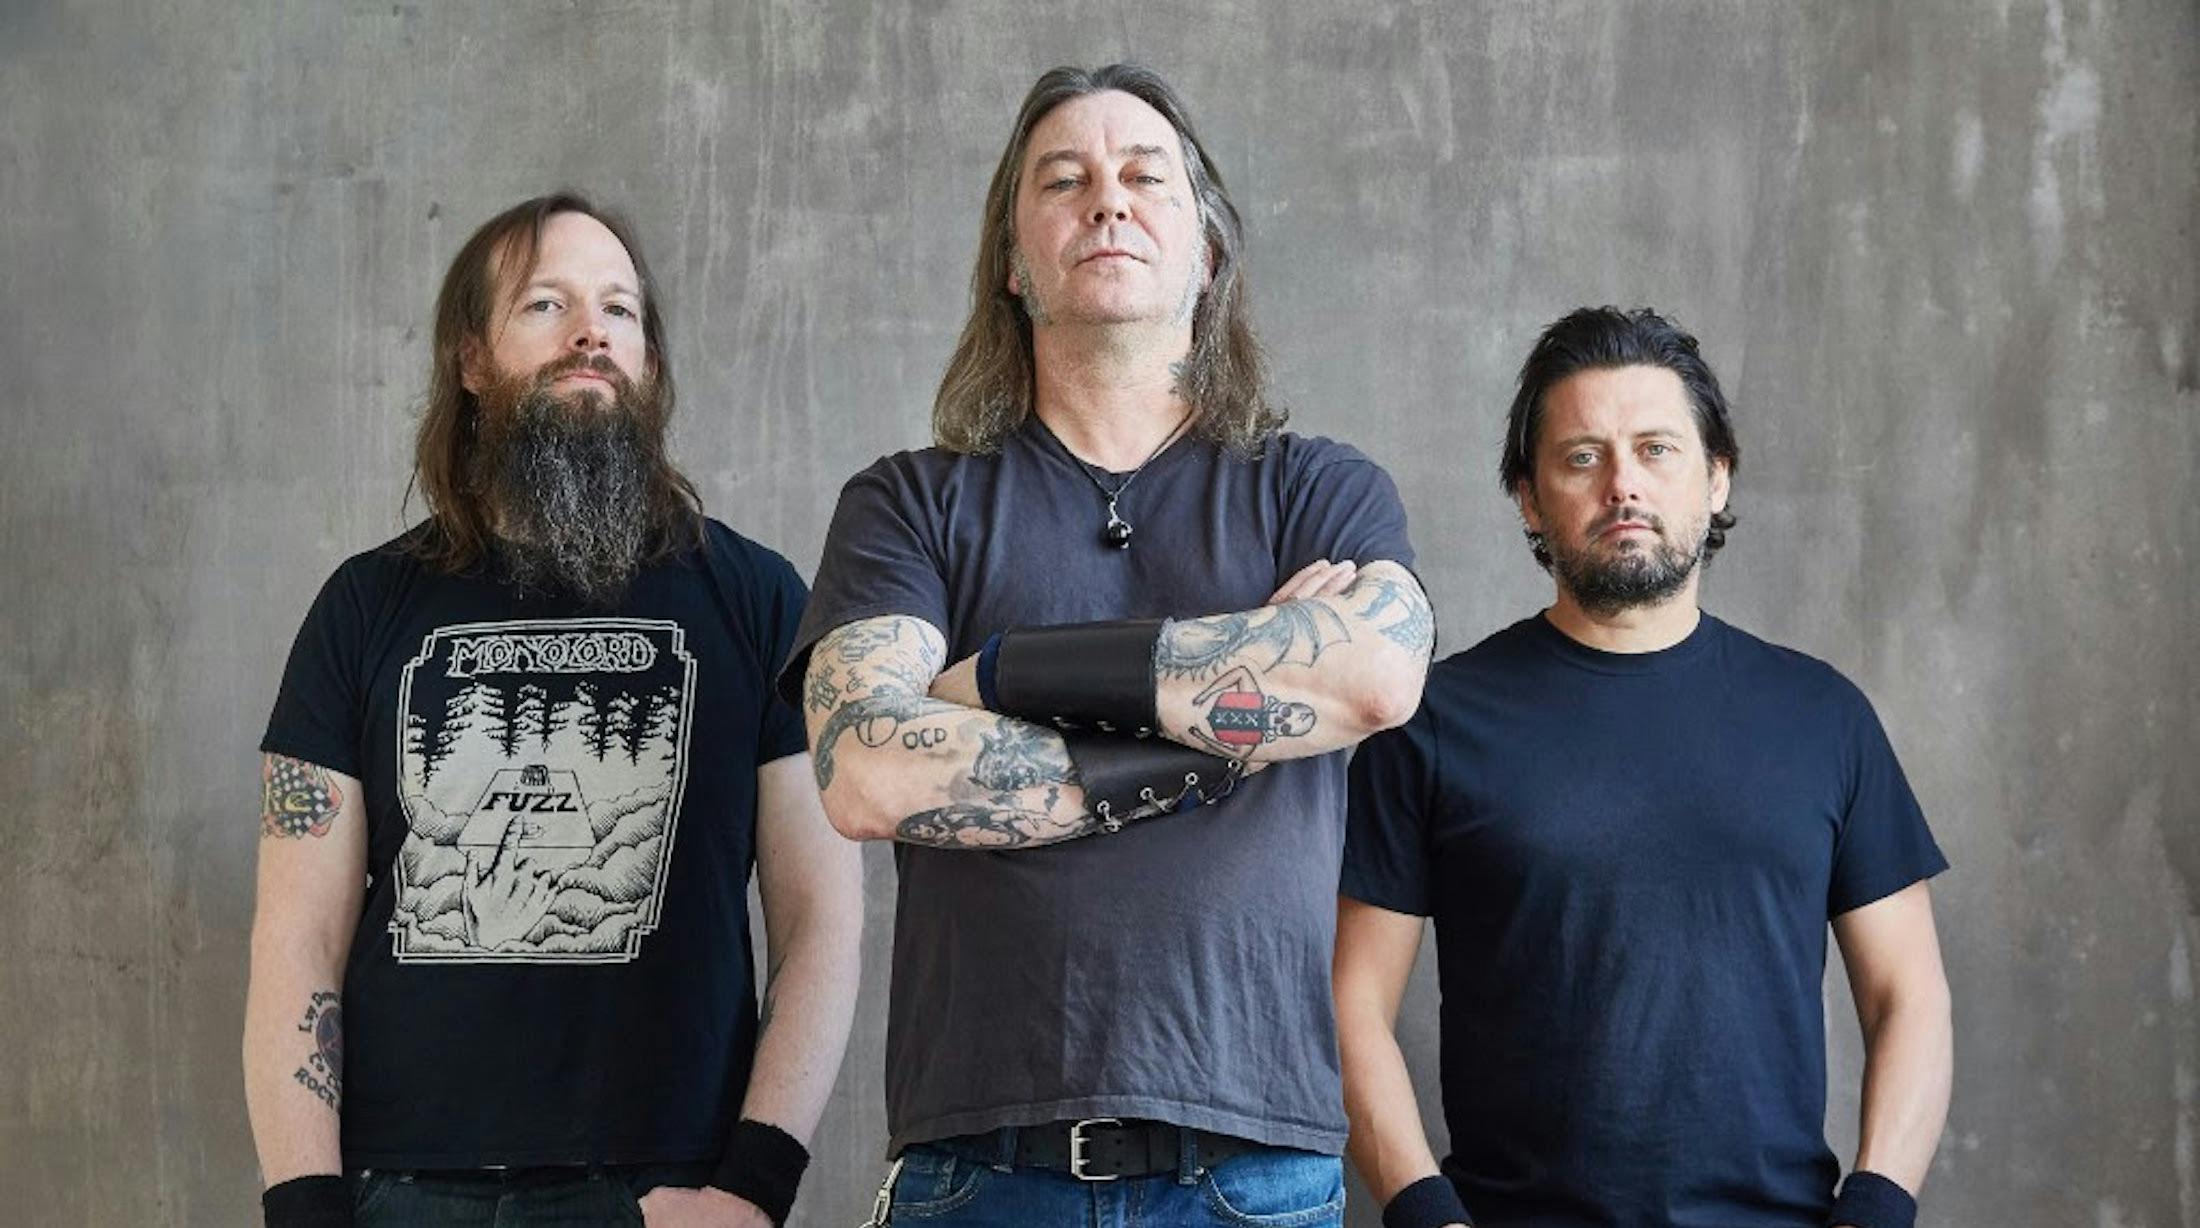 High On Fire Drops Off U.S. Tour For Partial Amputation of Matt Pike's Toe